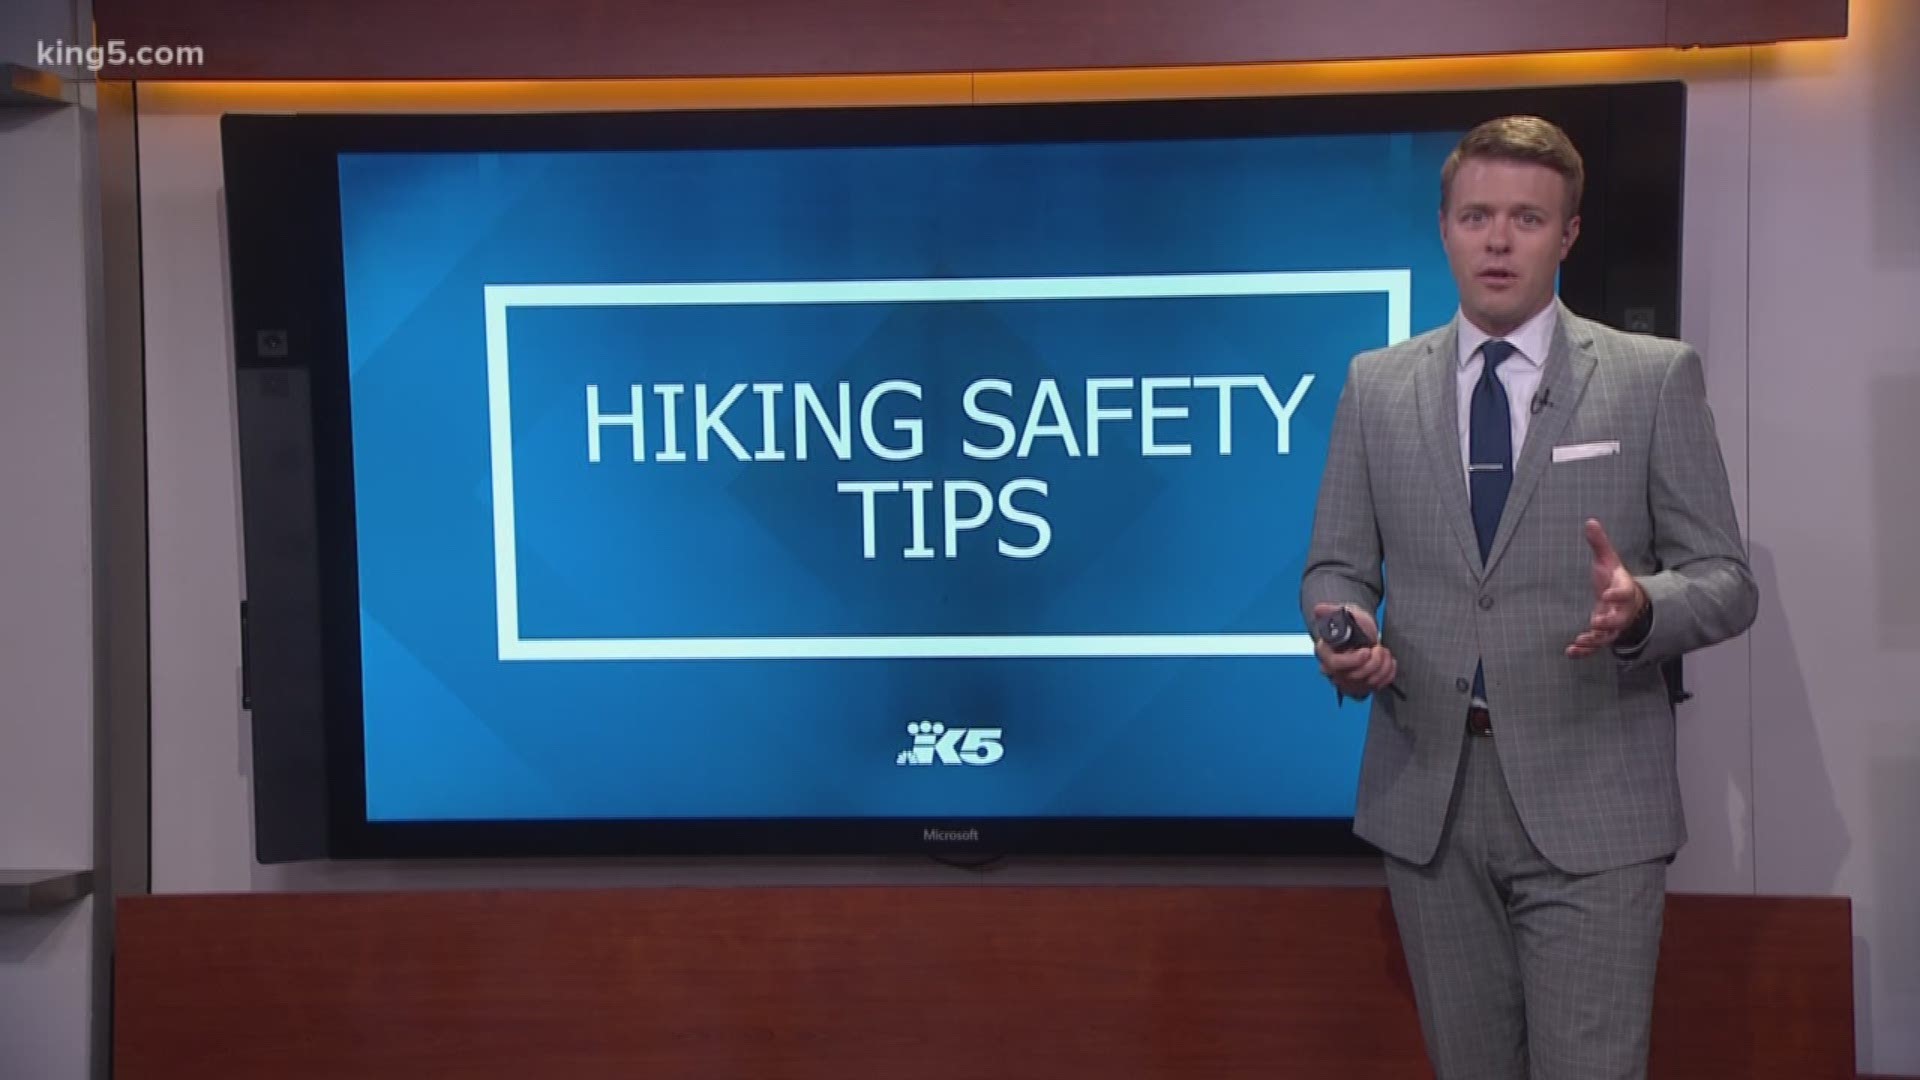 After two missing hikers were found safe after five days in the wilderness, Jake Whittenberg shares some tips for keeping safe while out hiking.